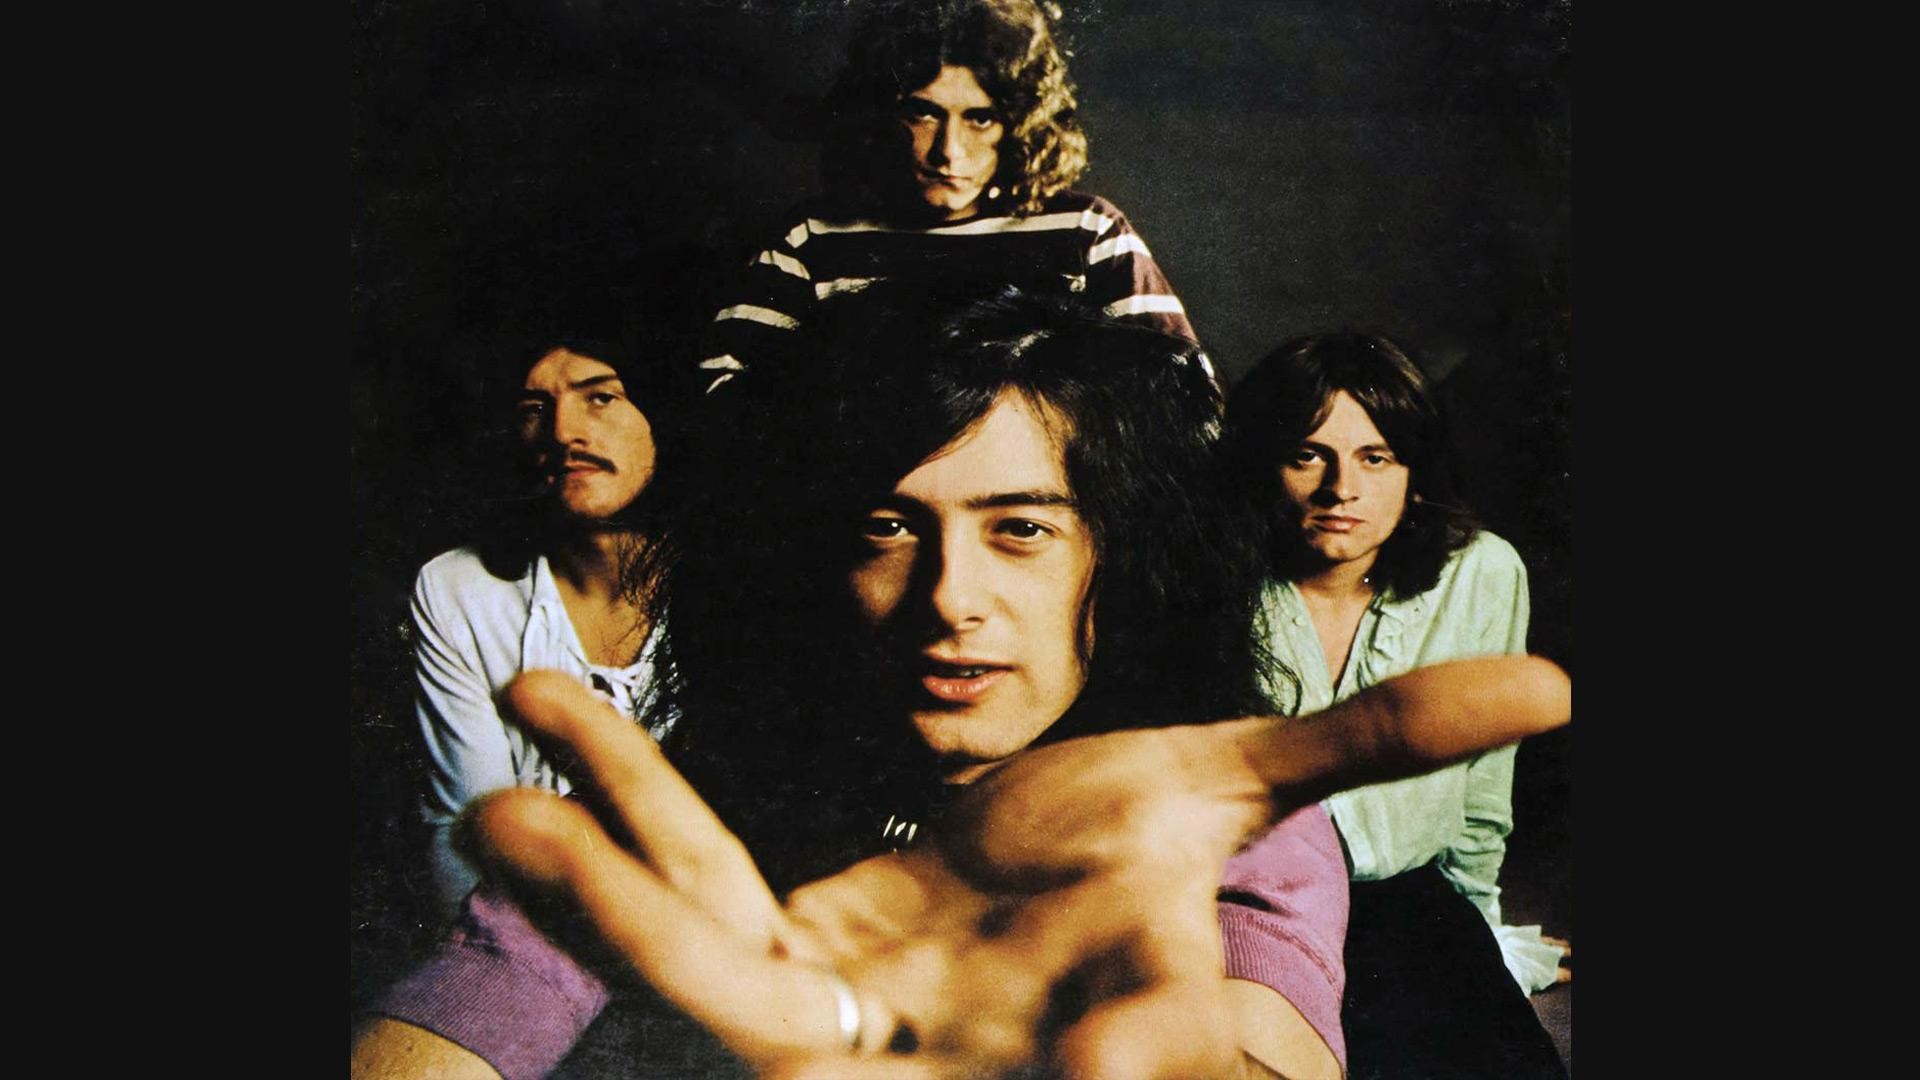 1920x1080 Classic Led Zeppelin Wallpaper With Jimmy Page In Front